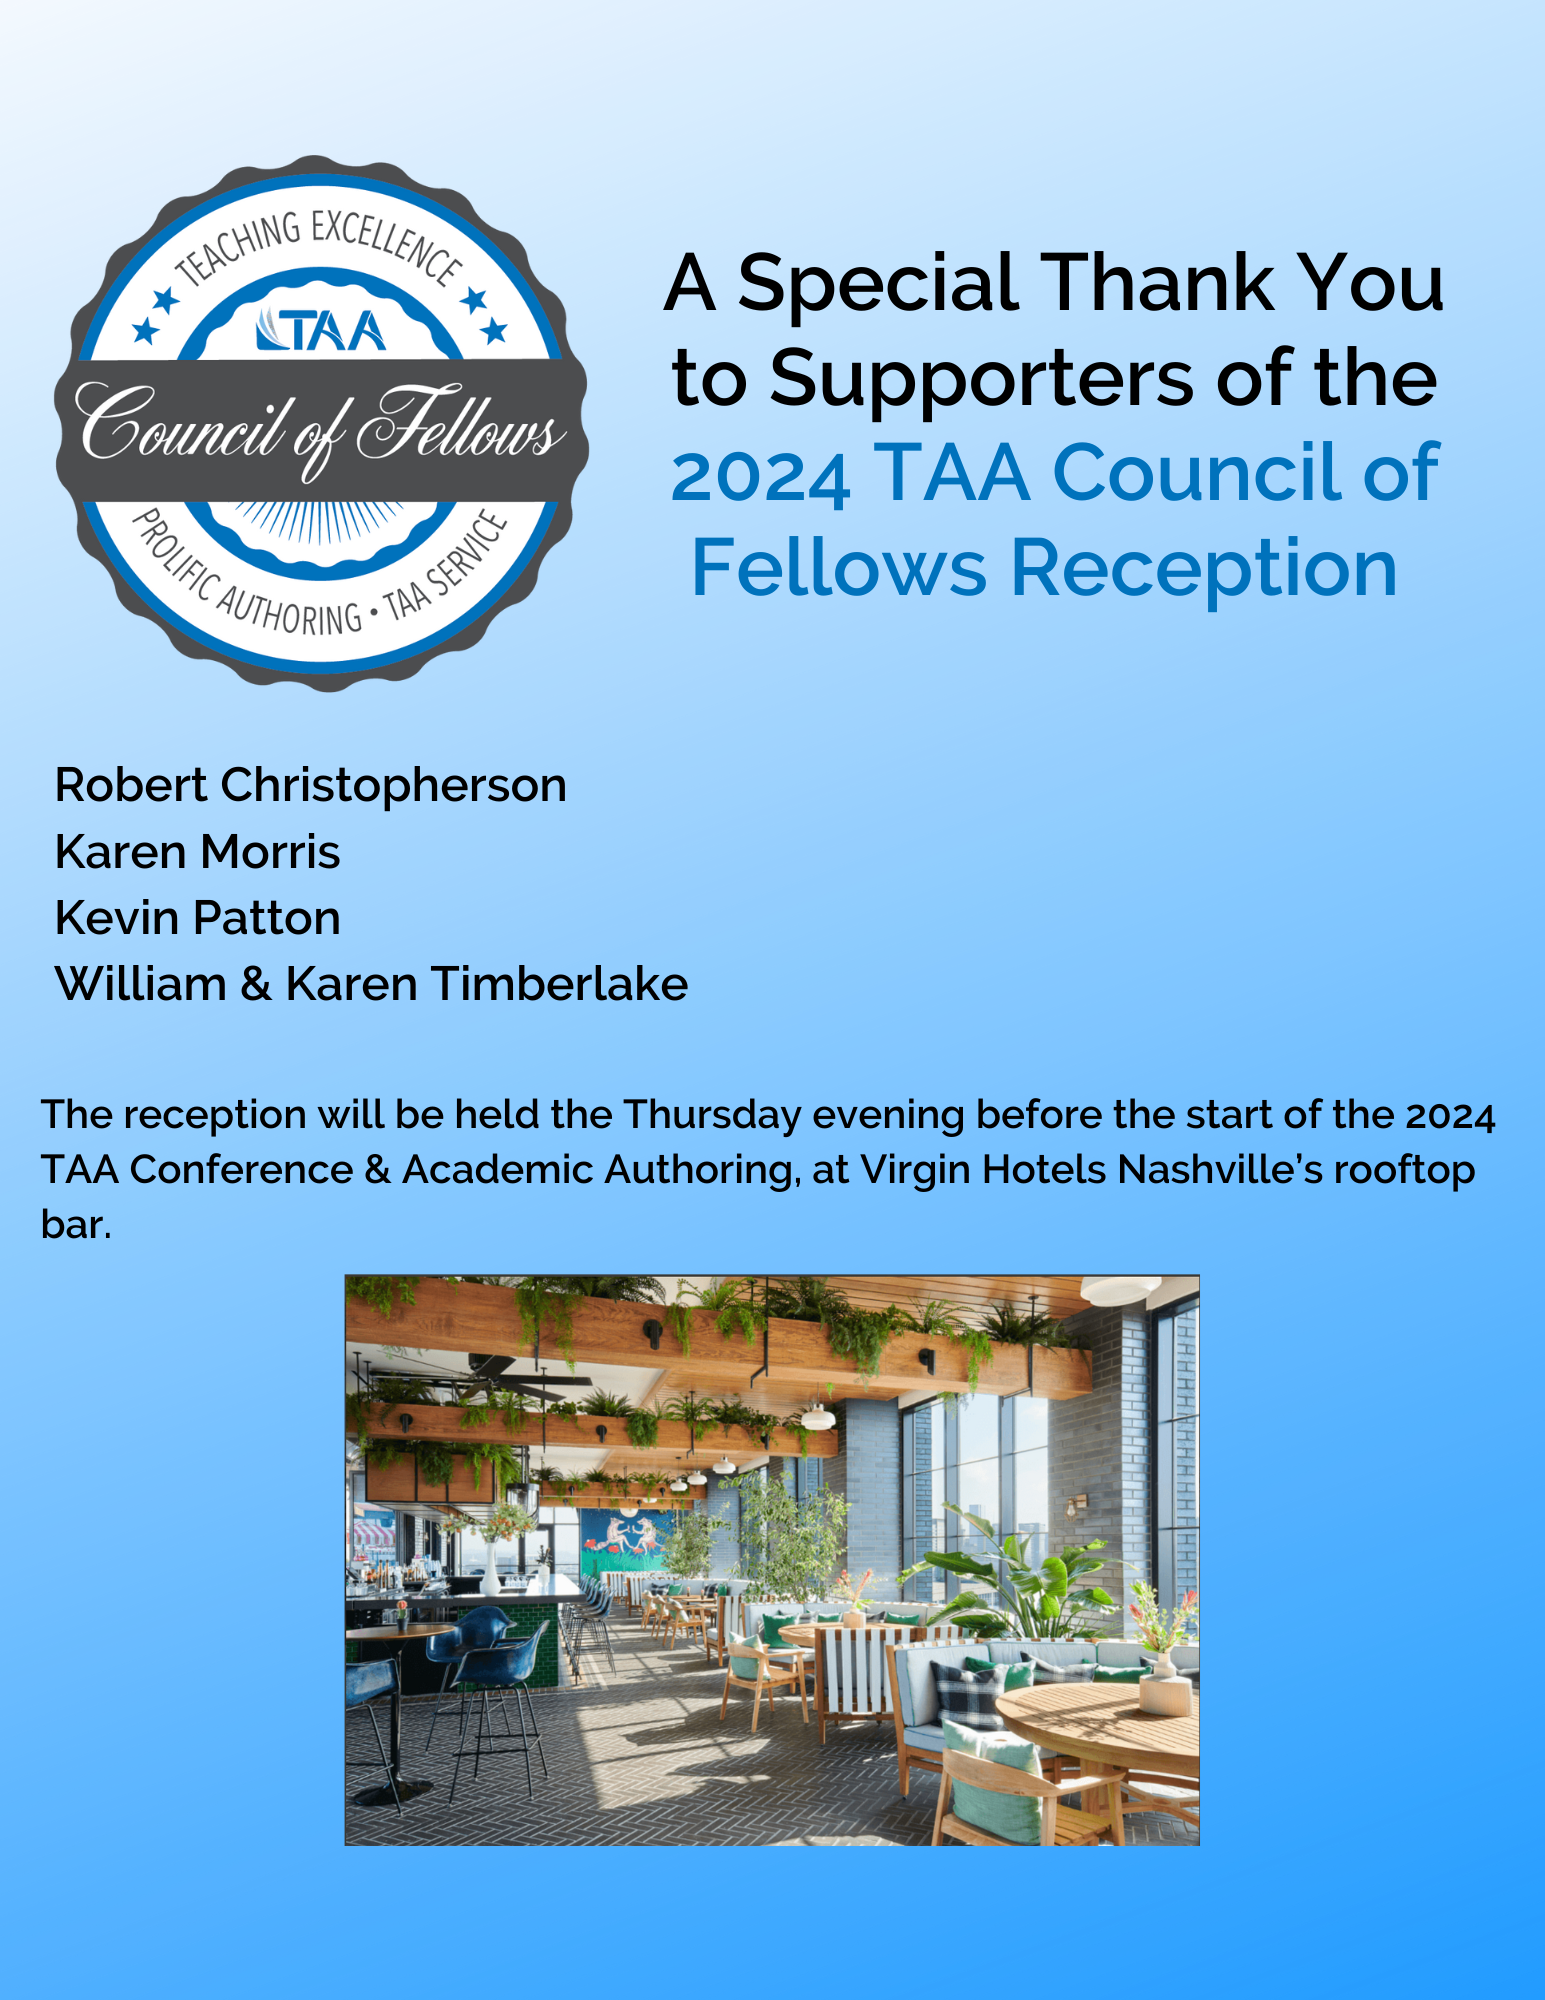 Thank you to supporters of 2024 TAA Council of Fellows Reception